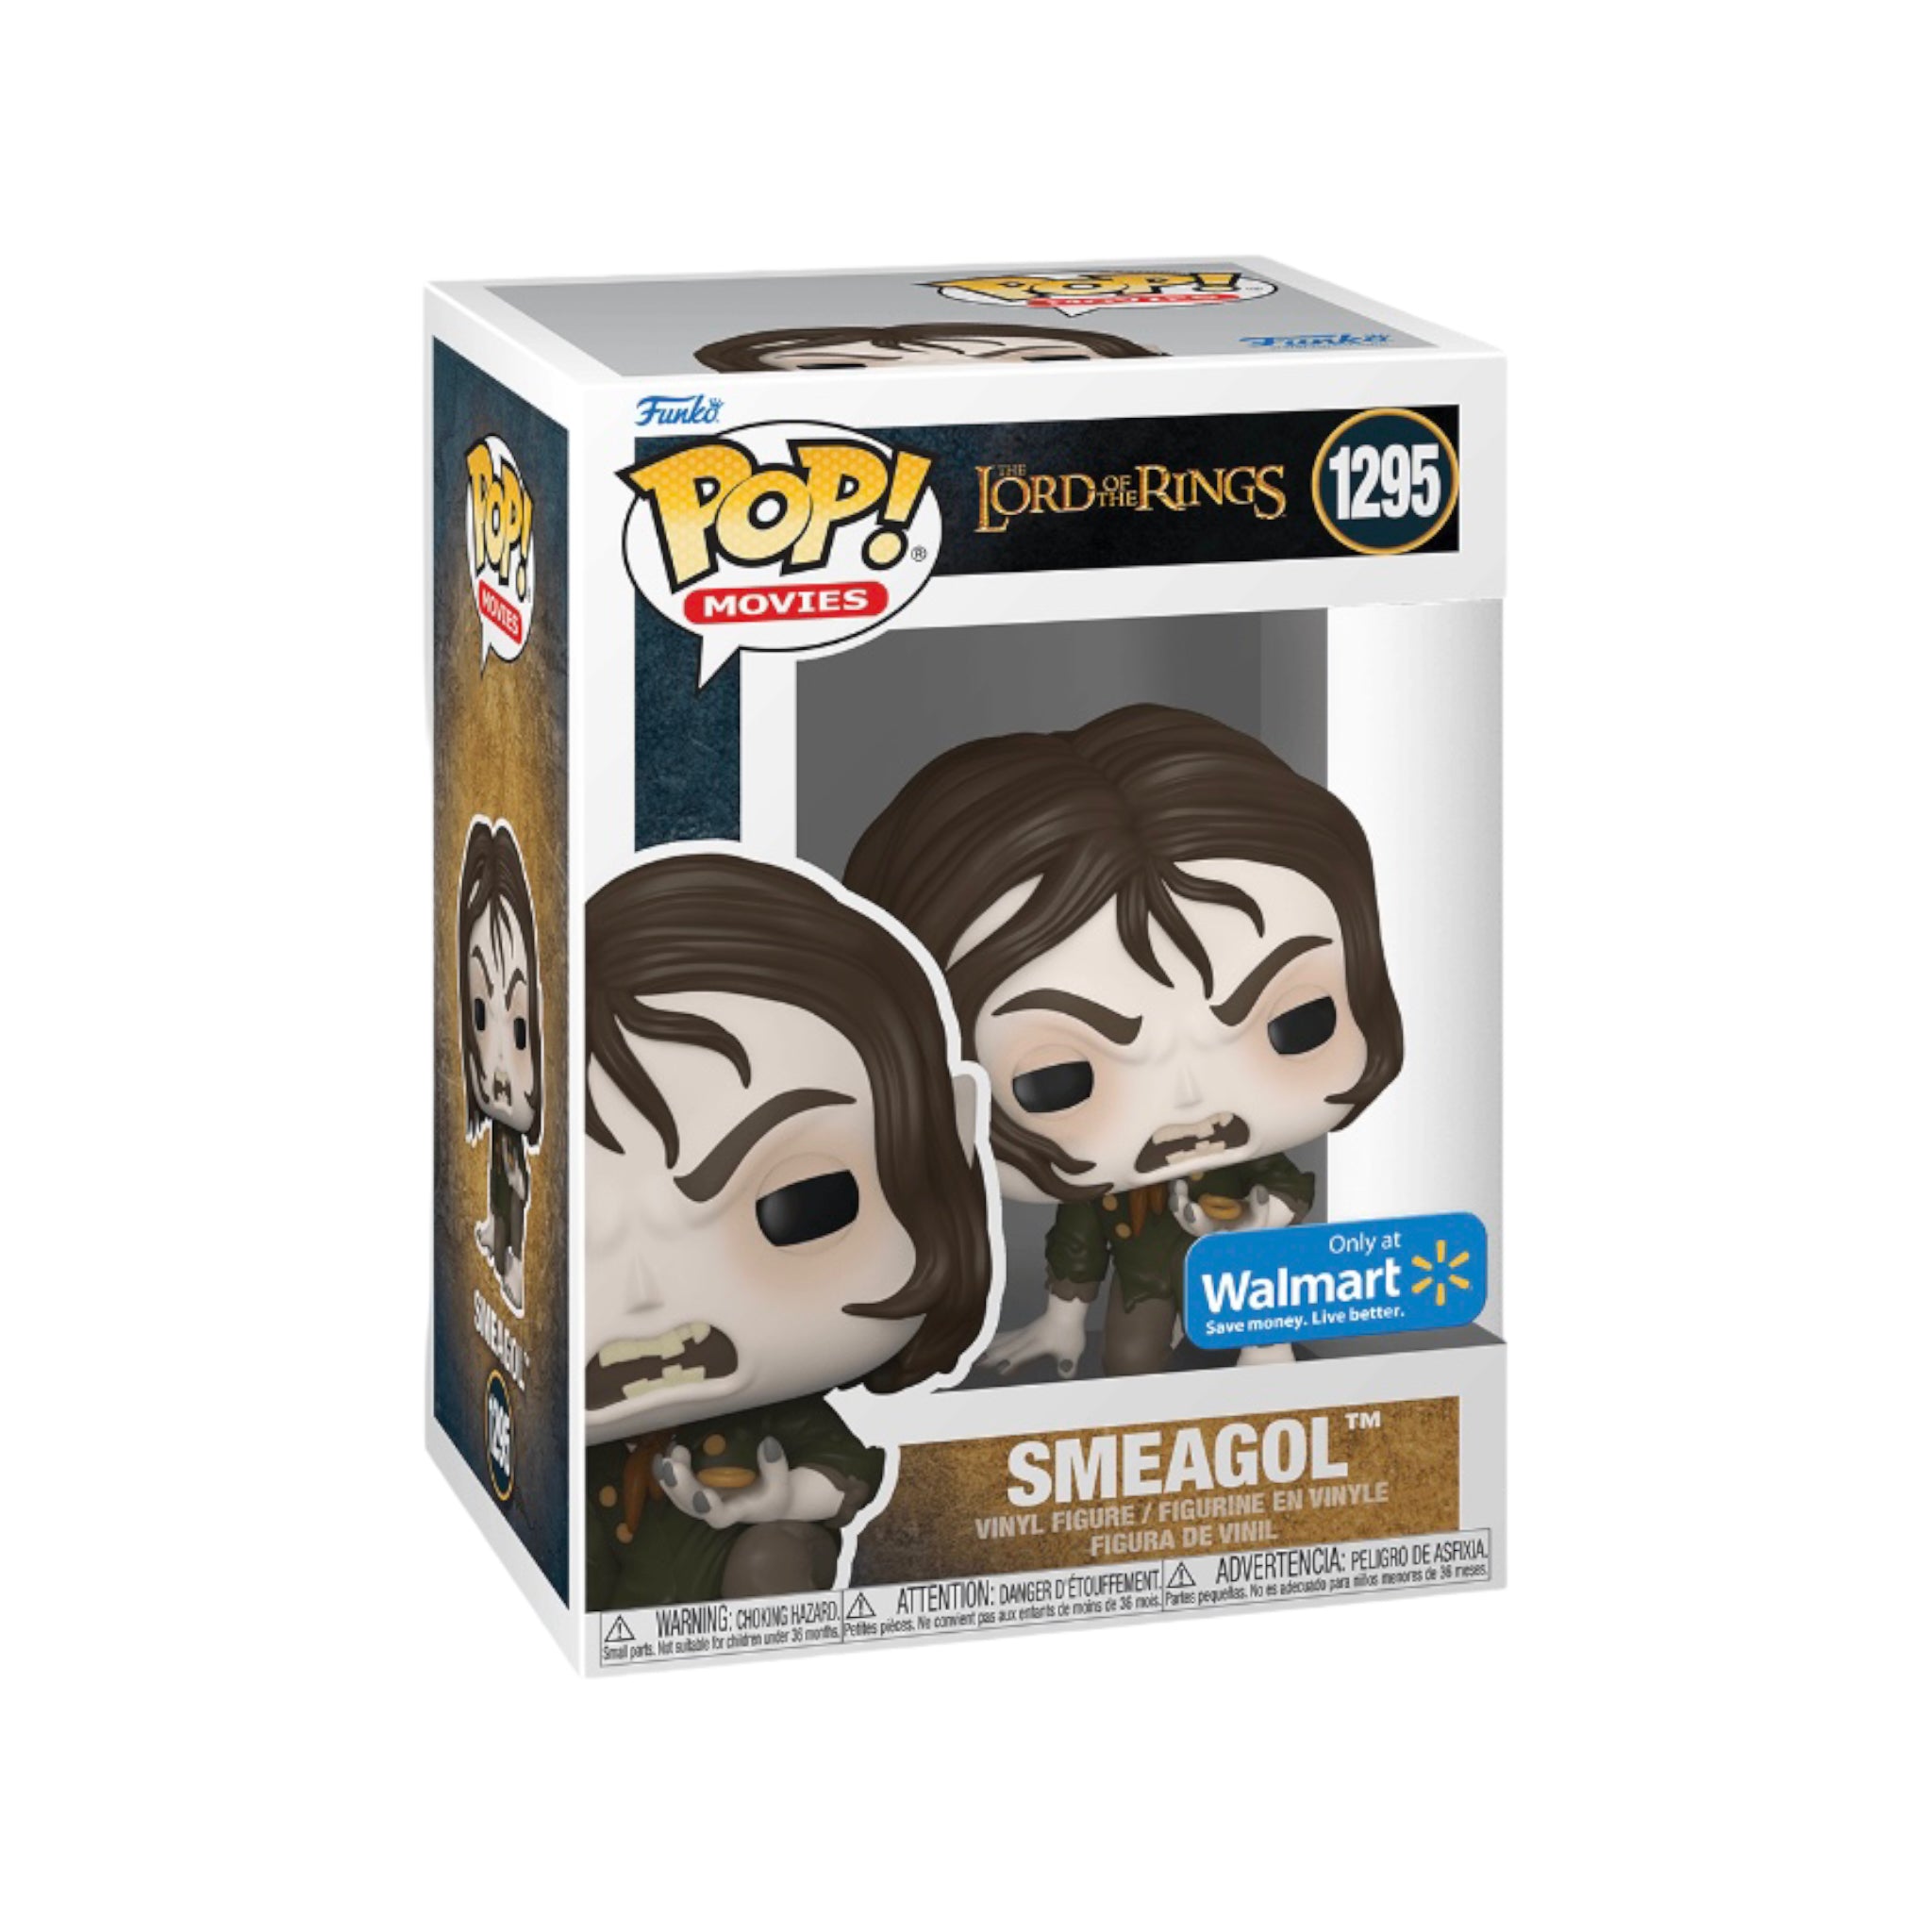 Smeagol #1295 Funko Pop! - The Lord of The Rings - Walmart Exclusive